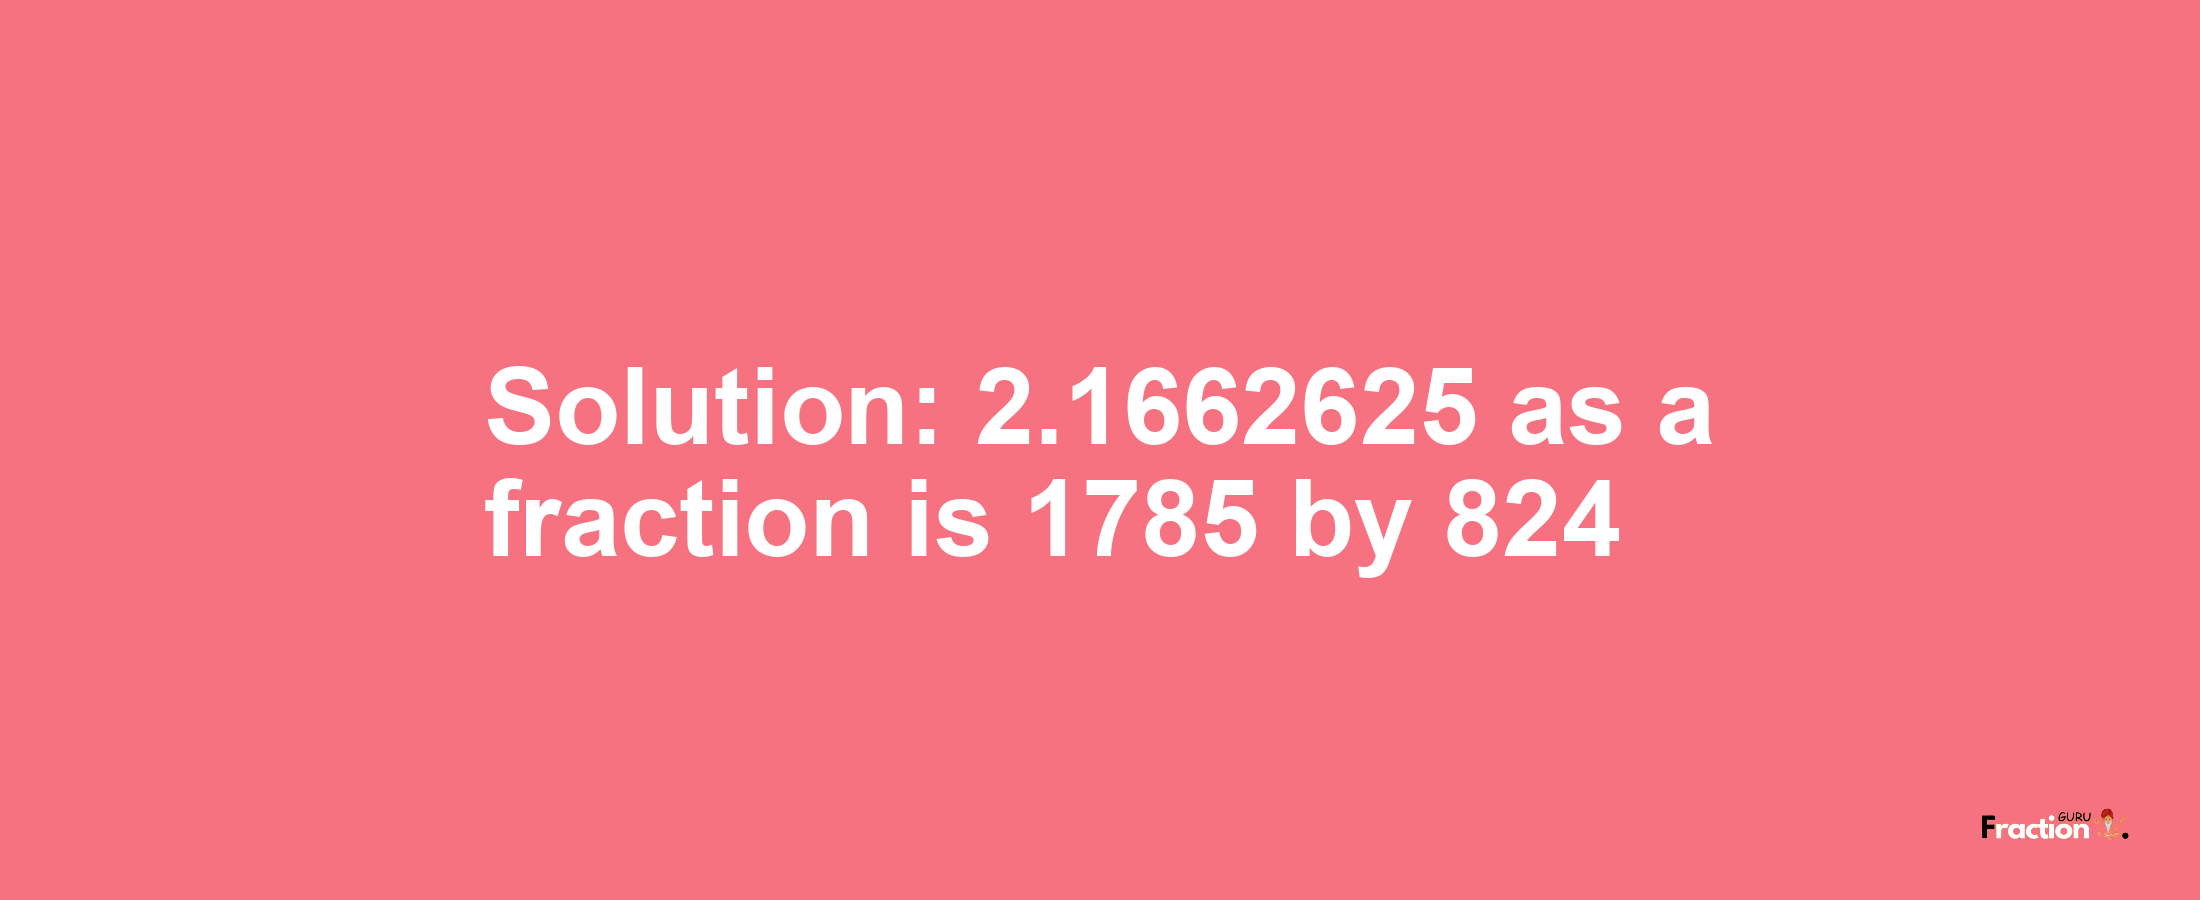 Solution:2.1662625 as a fraction is 1785/824